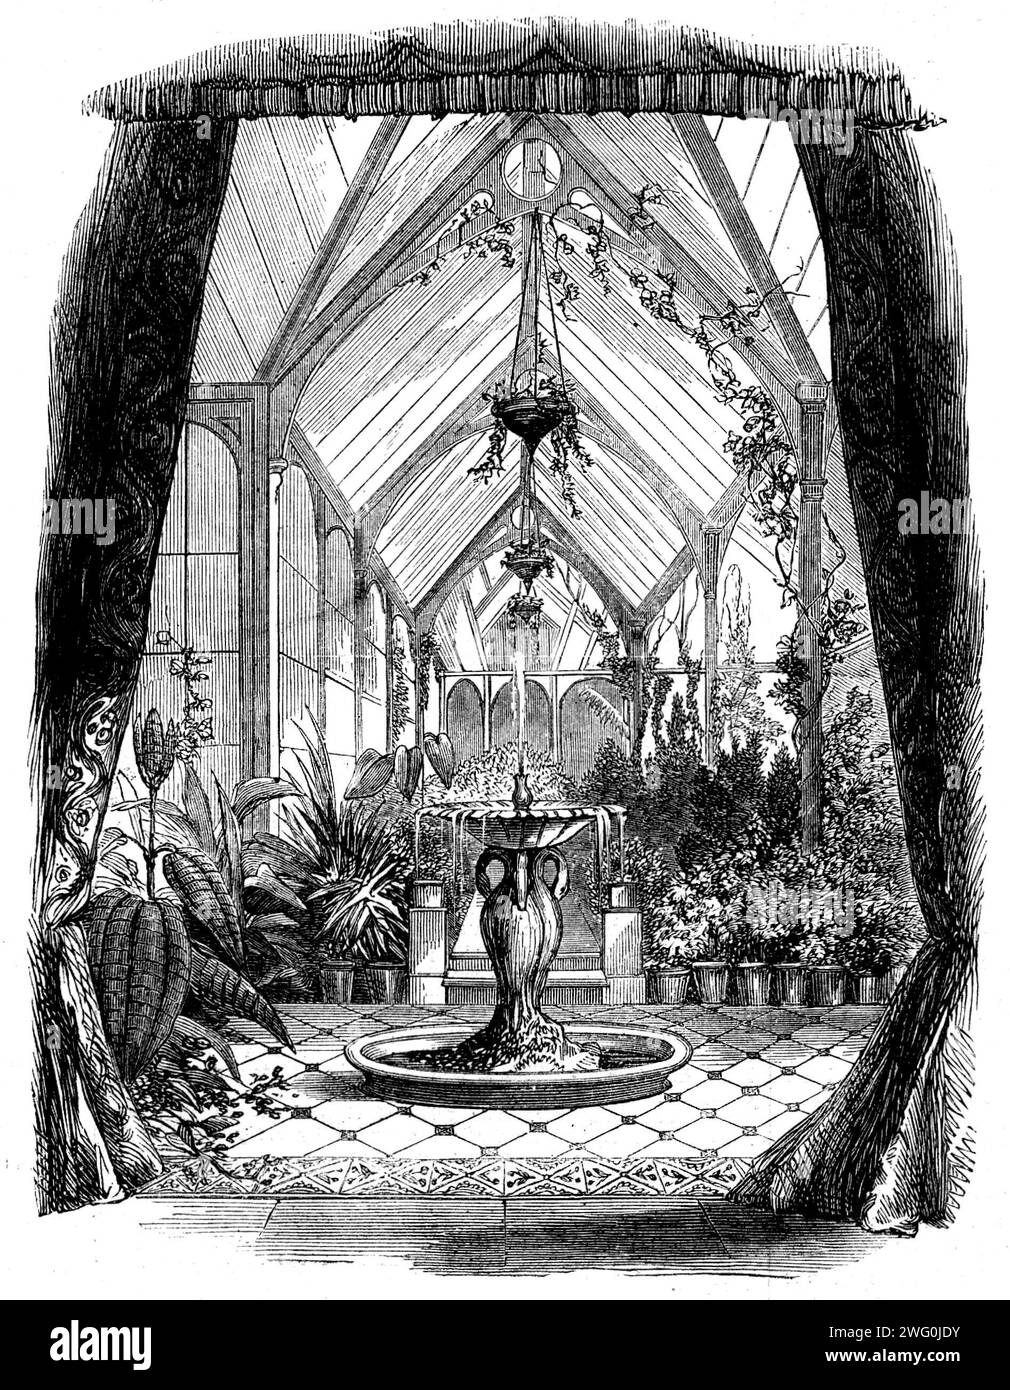 The marriage of Princess Alice with Prince Louis of Hesse: St. Clare, Isle of Wight, the temporary abode of their Royal Highnesses: The Conservatory, St. Clare, 1862. '...the Royal bride and bridegroom retired to St. Clare, at Spring Vale, the residence of Colonel and Lady Katherine Vernon Harcourt...[It was] selected by the Queen for the honeymoon of the Prince and Princess...on account of [its] beautiful situation'. From &quot;Illustrated London News&quot;, 1862. Stock Photo